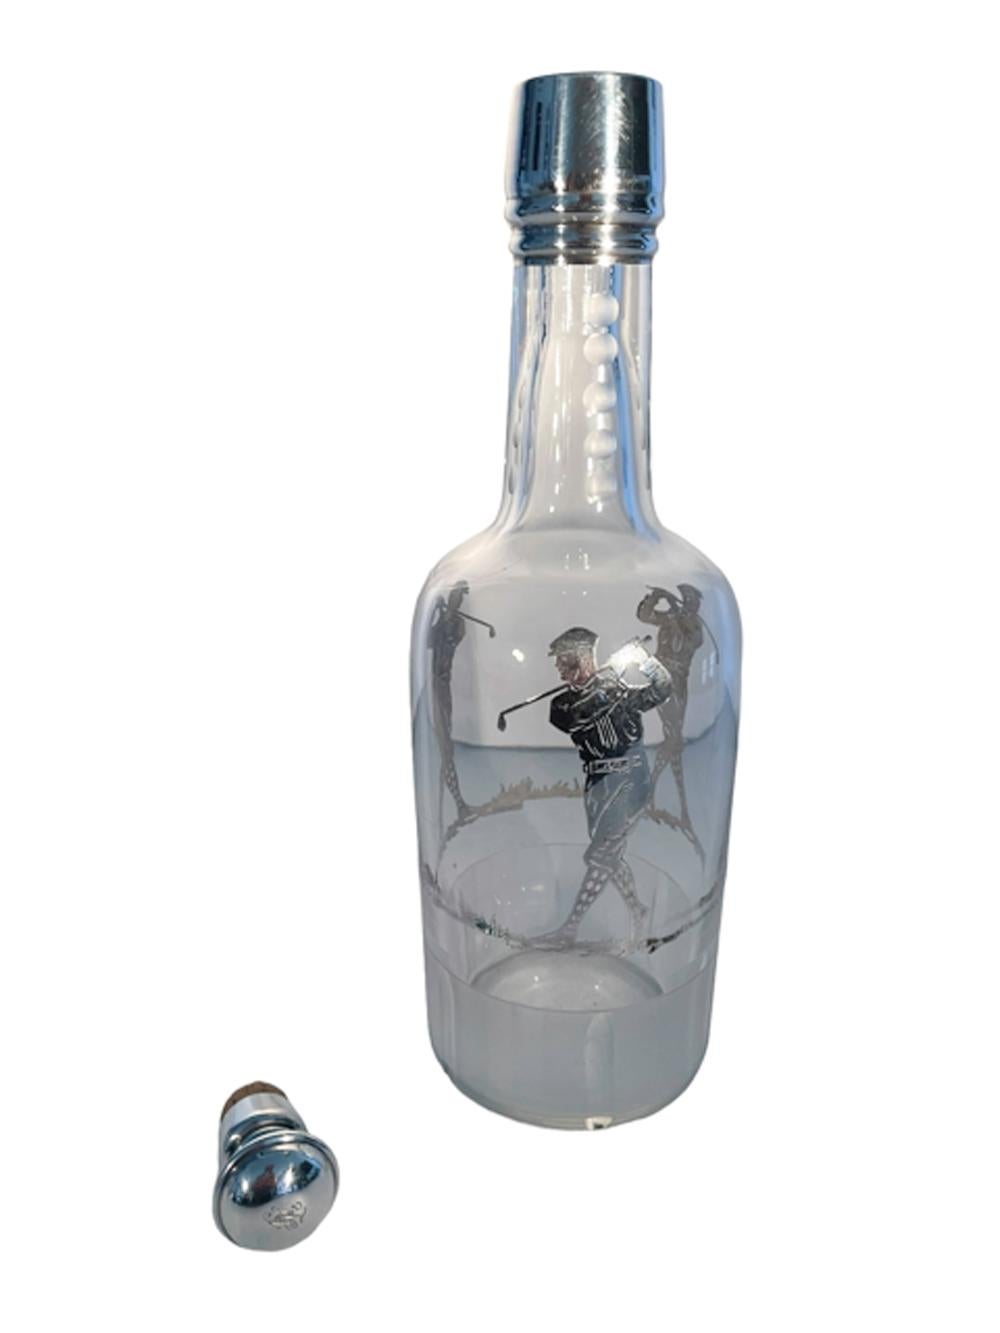 American Art Deco Silver Overlay Cut Glass Golf Themed Back Bar Bottle or Decanter For Sale